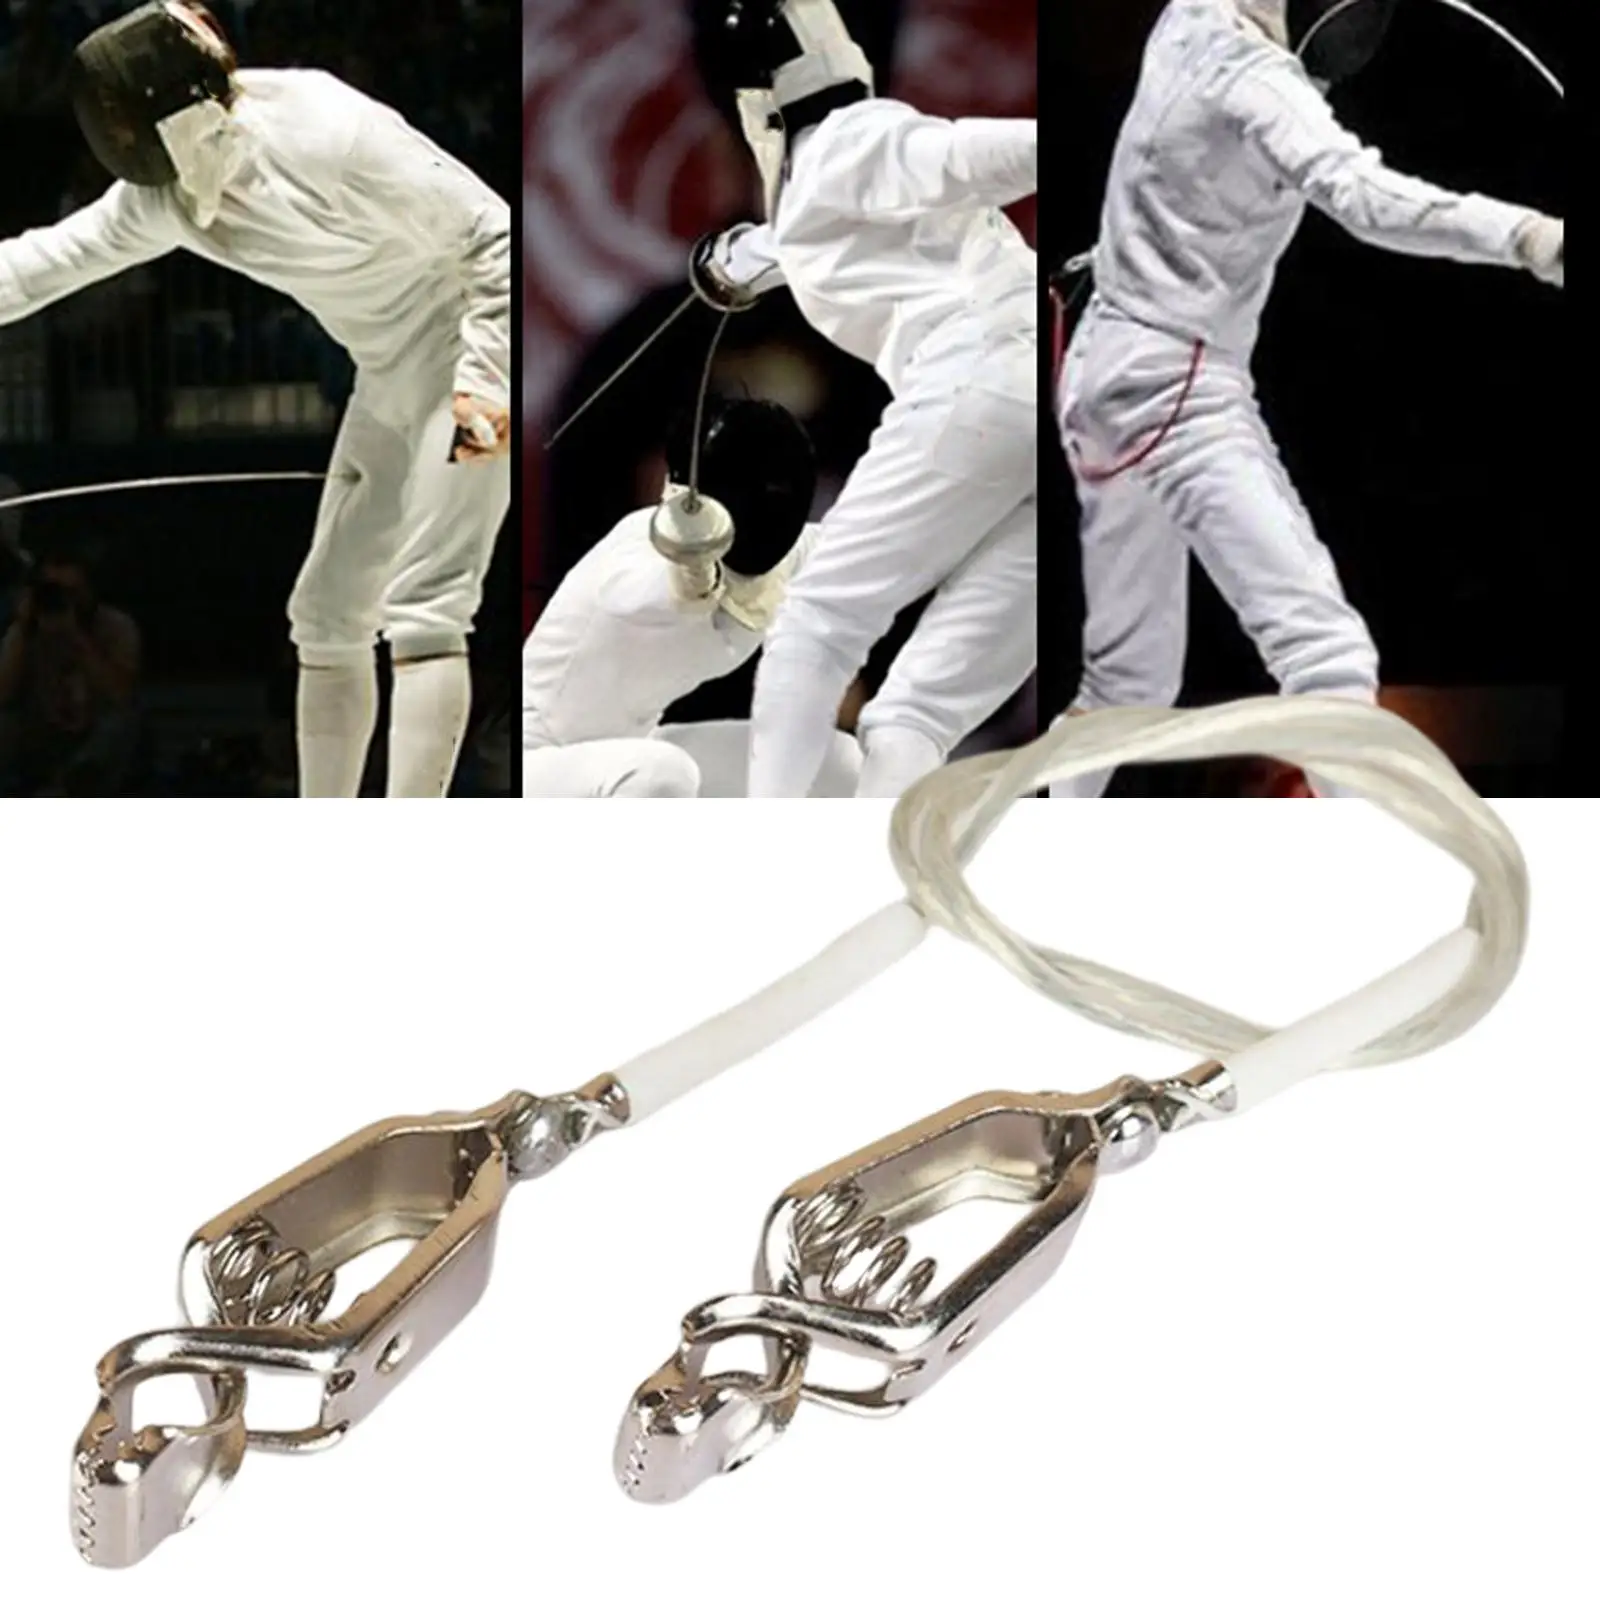 Fencing Floret Mask Components Accs Flore Flexible Spare Wire for Competitions